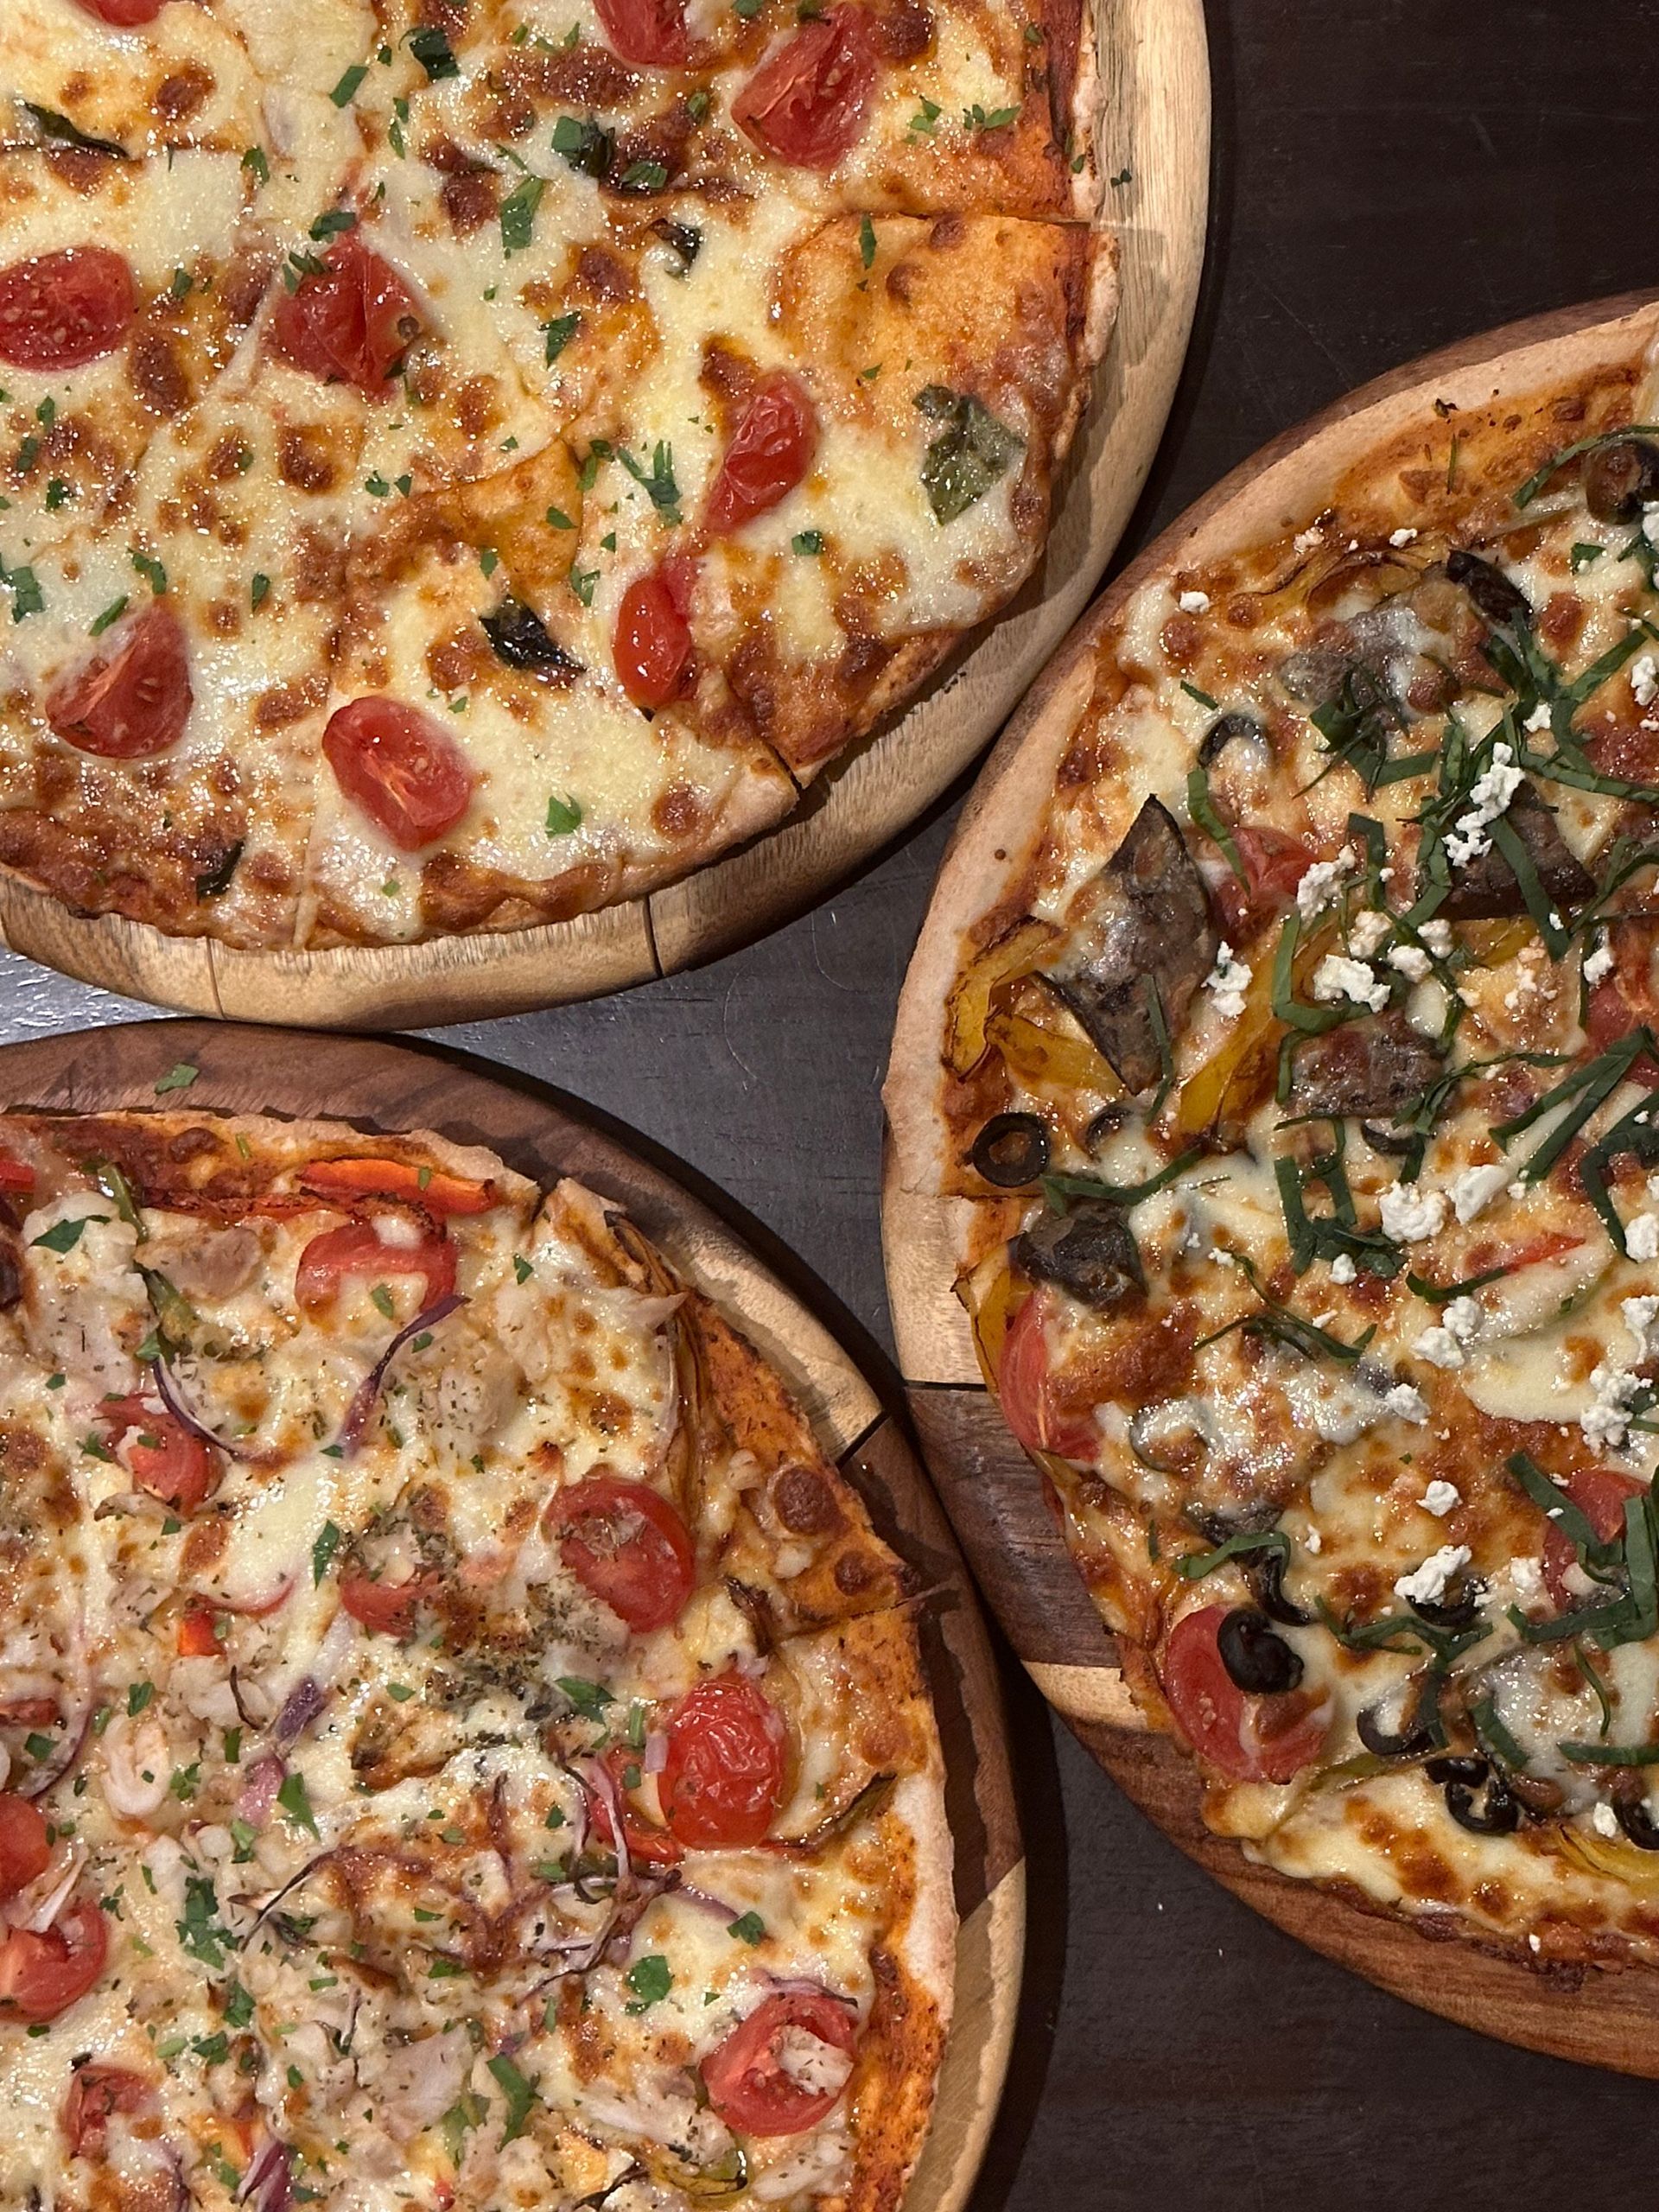 Three pizzas are sitting on a wooden table.